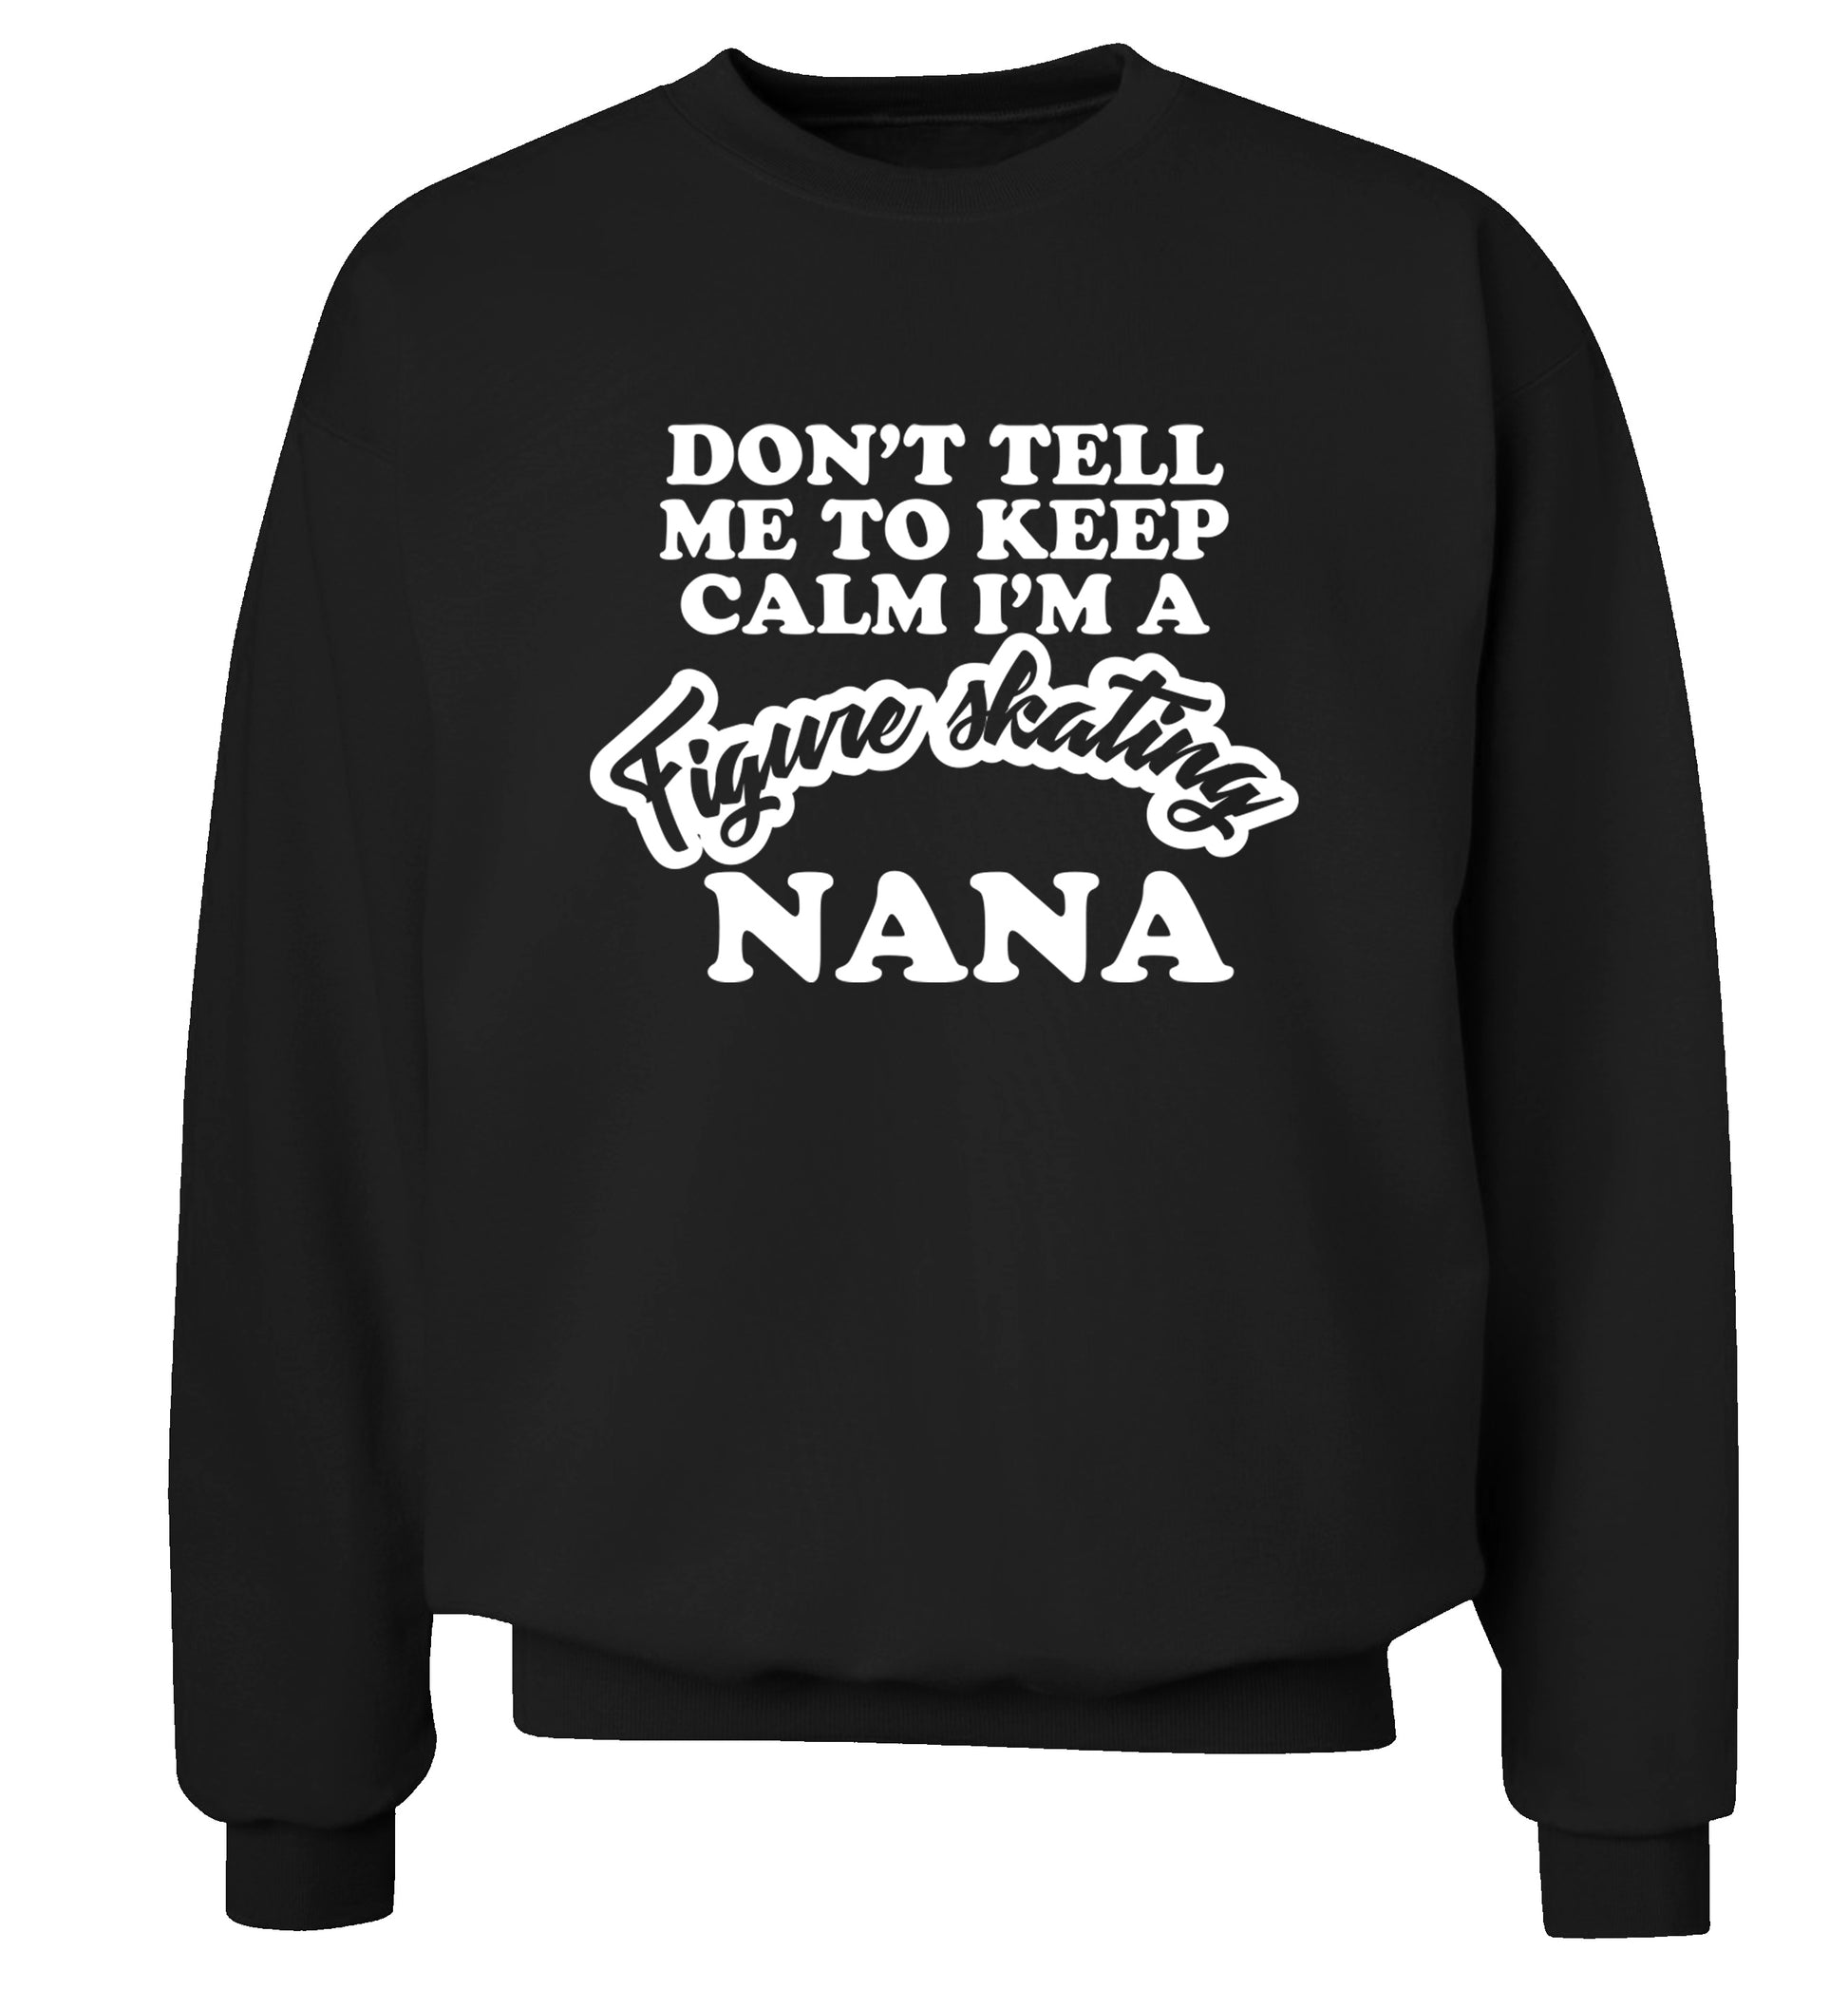 Don't tell me to keep calm I'm a figure skating nana Adult's unisexblack Sweater 2XL